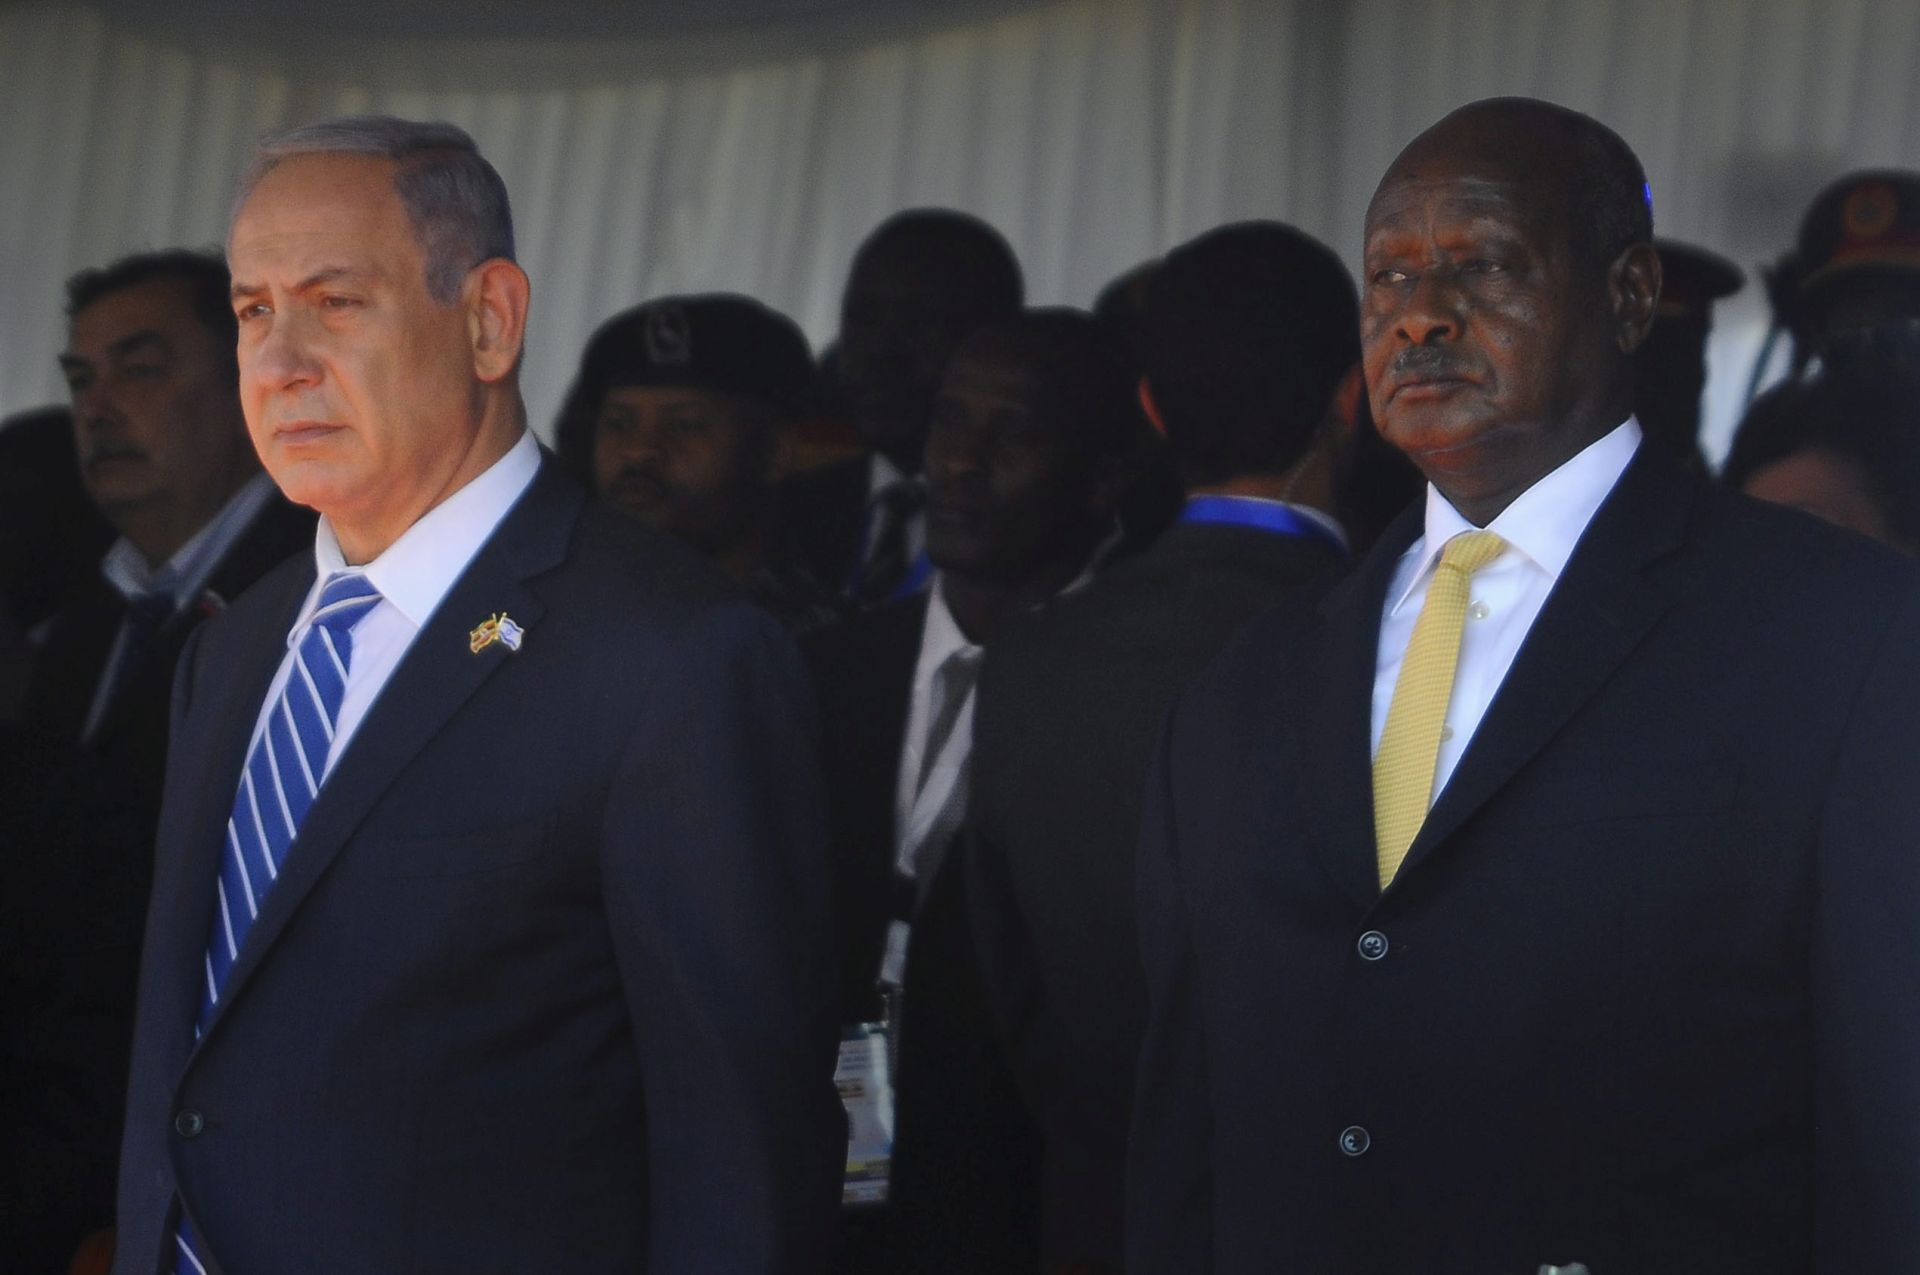 epa05407571 Israeli Prime Minister Benjamin Netanyahu (L) and Ugandan President Yoweri Museveni (R) stand during a ceremony upon his arrival at Entebbe International Airport in Entebbe, Uganda, 04 July 2016. Netanyahu attended the ceremony to mark the 40th anniversary of the Entebbe Operation in which his brother was killed. Netanyahu started his four-nation African tour on 04 July before visiting Kenya, Rwanda and Ethiopia.  EPA/RONALD KABUUBI